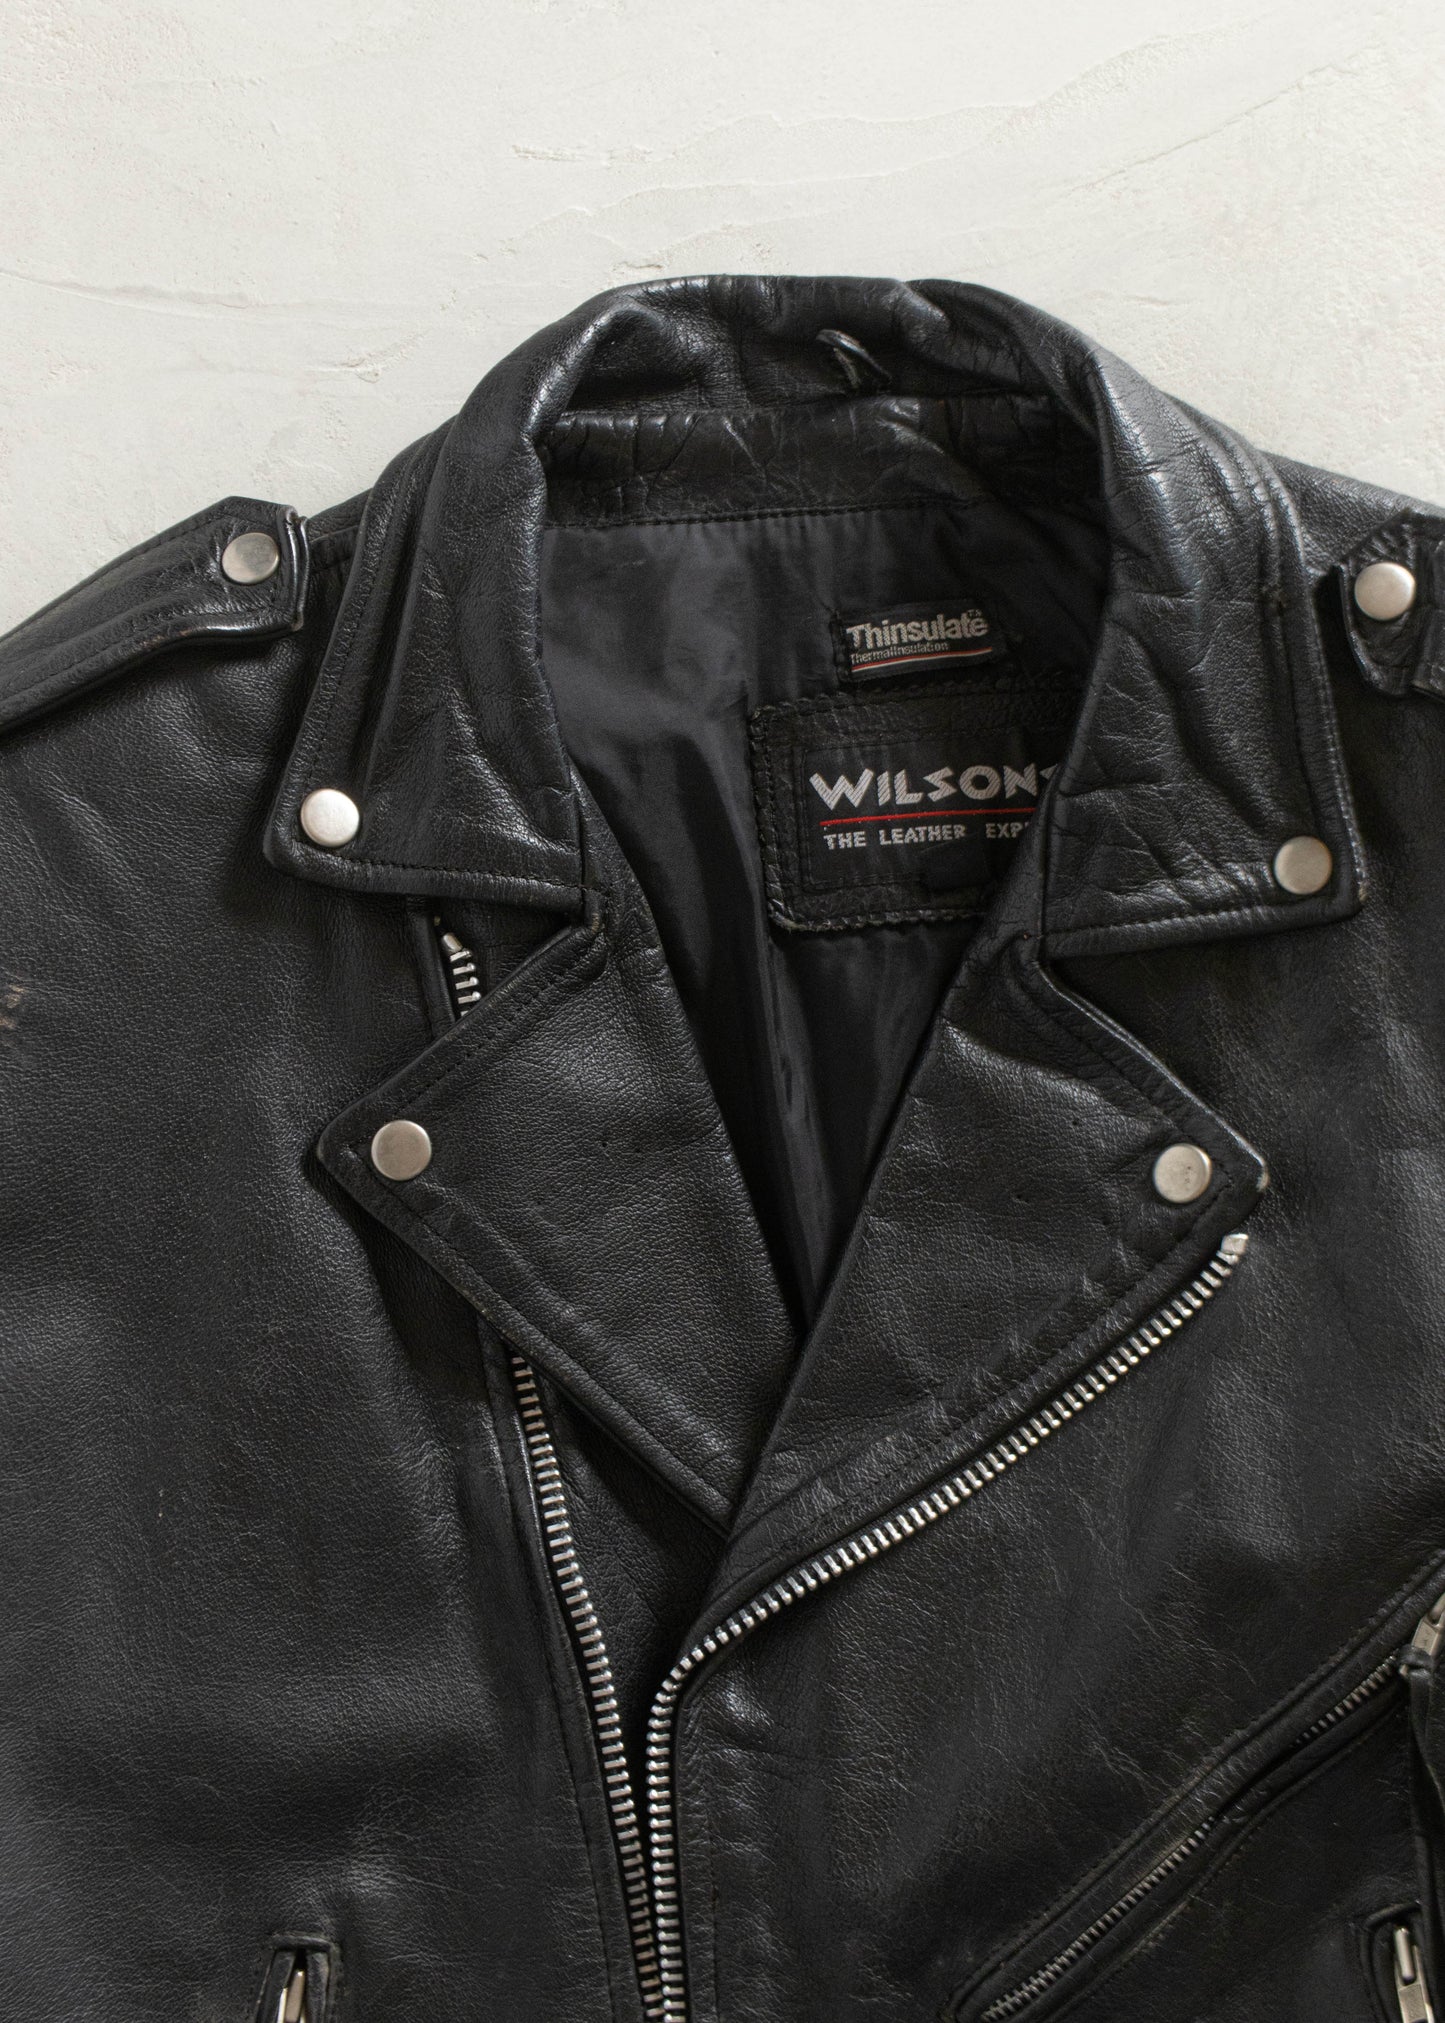 1990s Wilsons Motorcycle Leather Jacket Size S/M